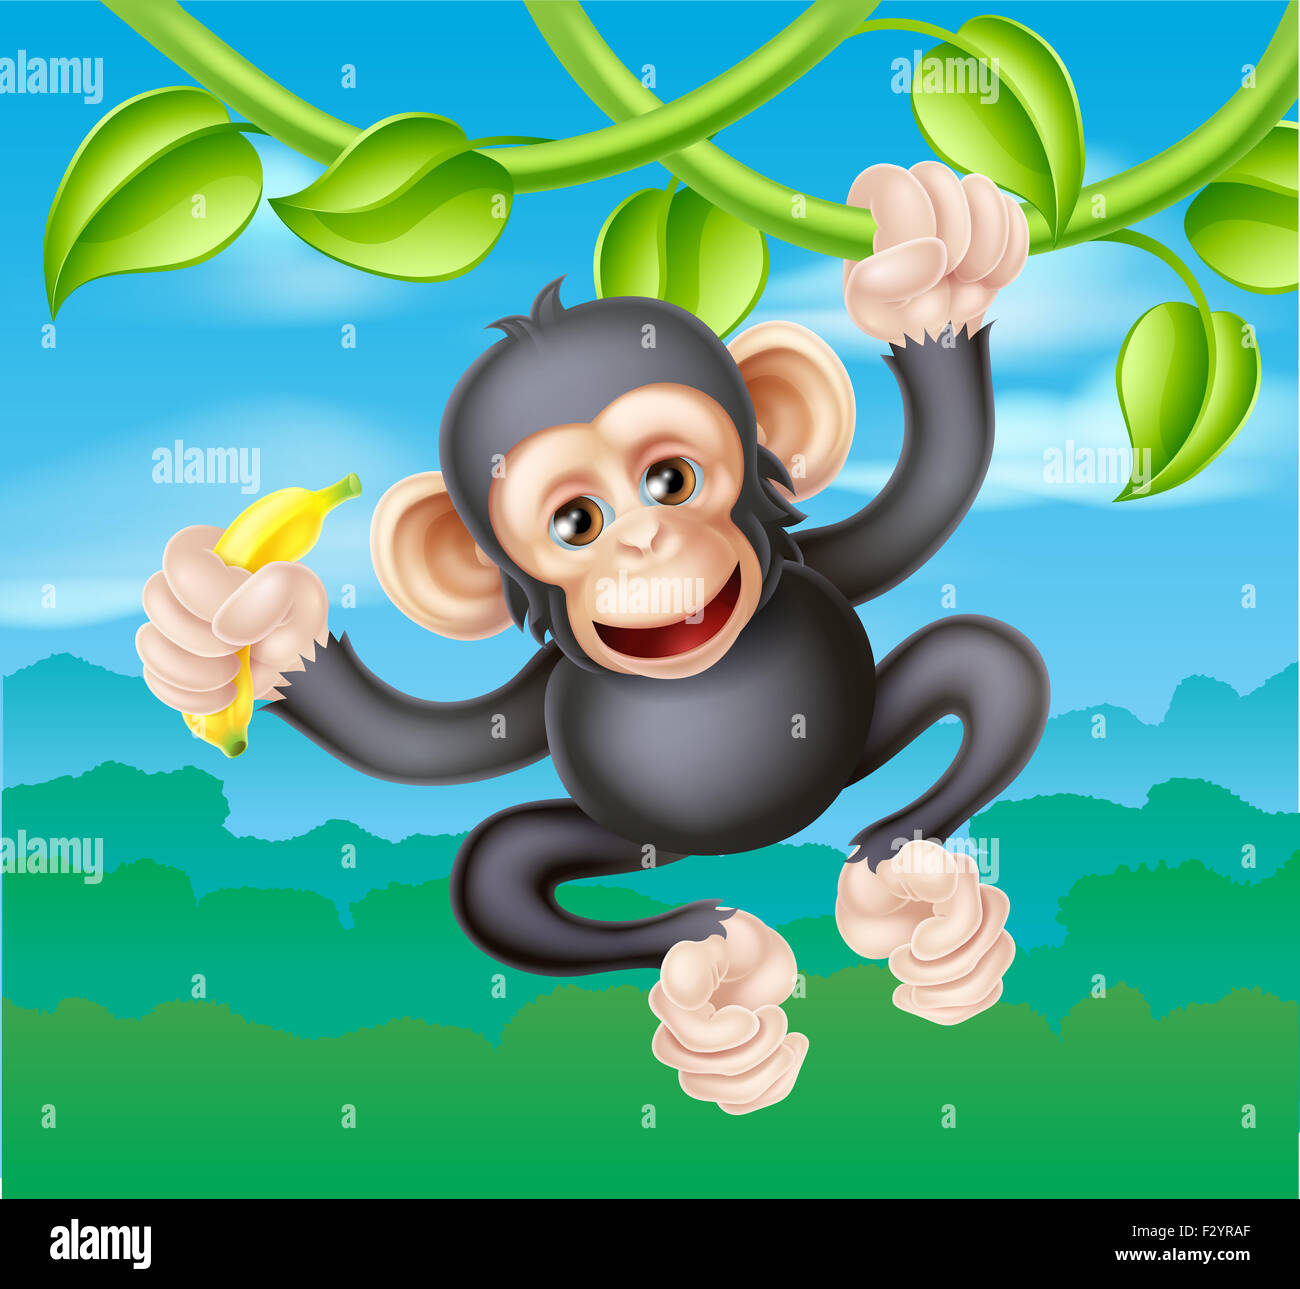 A cute cartoon chimp primate, similar in appearance to a monkey, character swinging from vines in the trees of a jungle. Holding Stock Photo